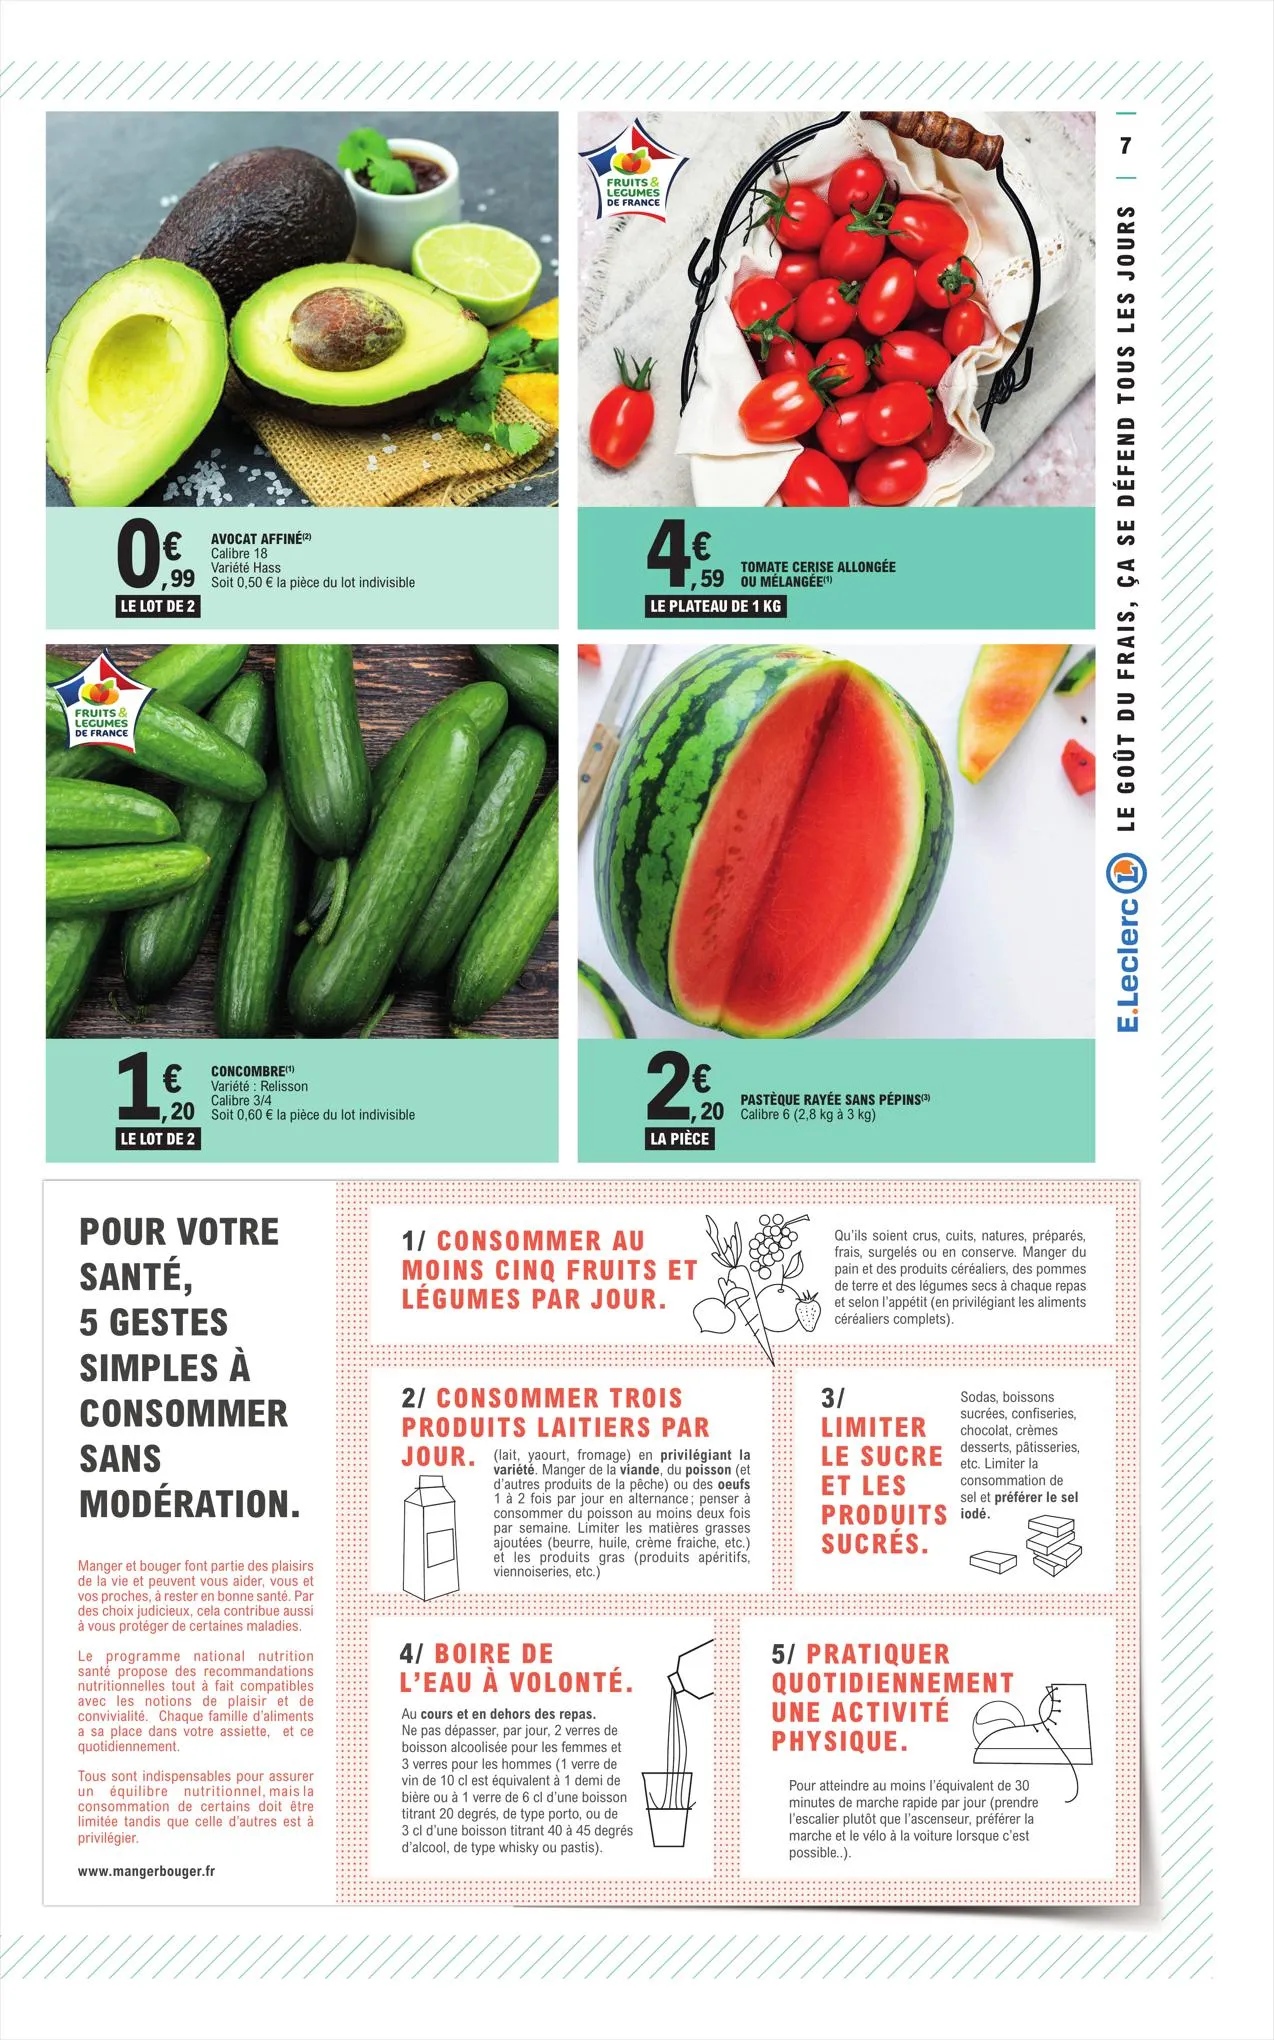 Catalogue Relance Alimentaire 10 - Mixte, page 00007